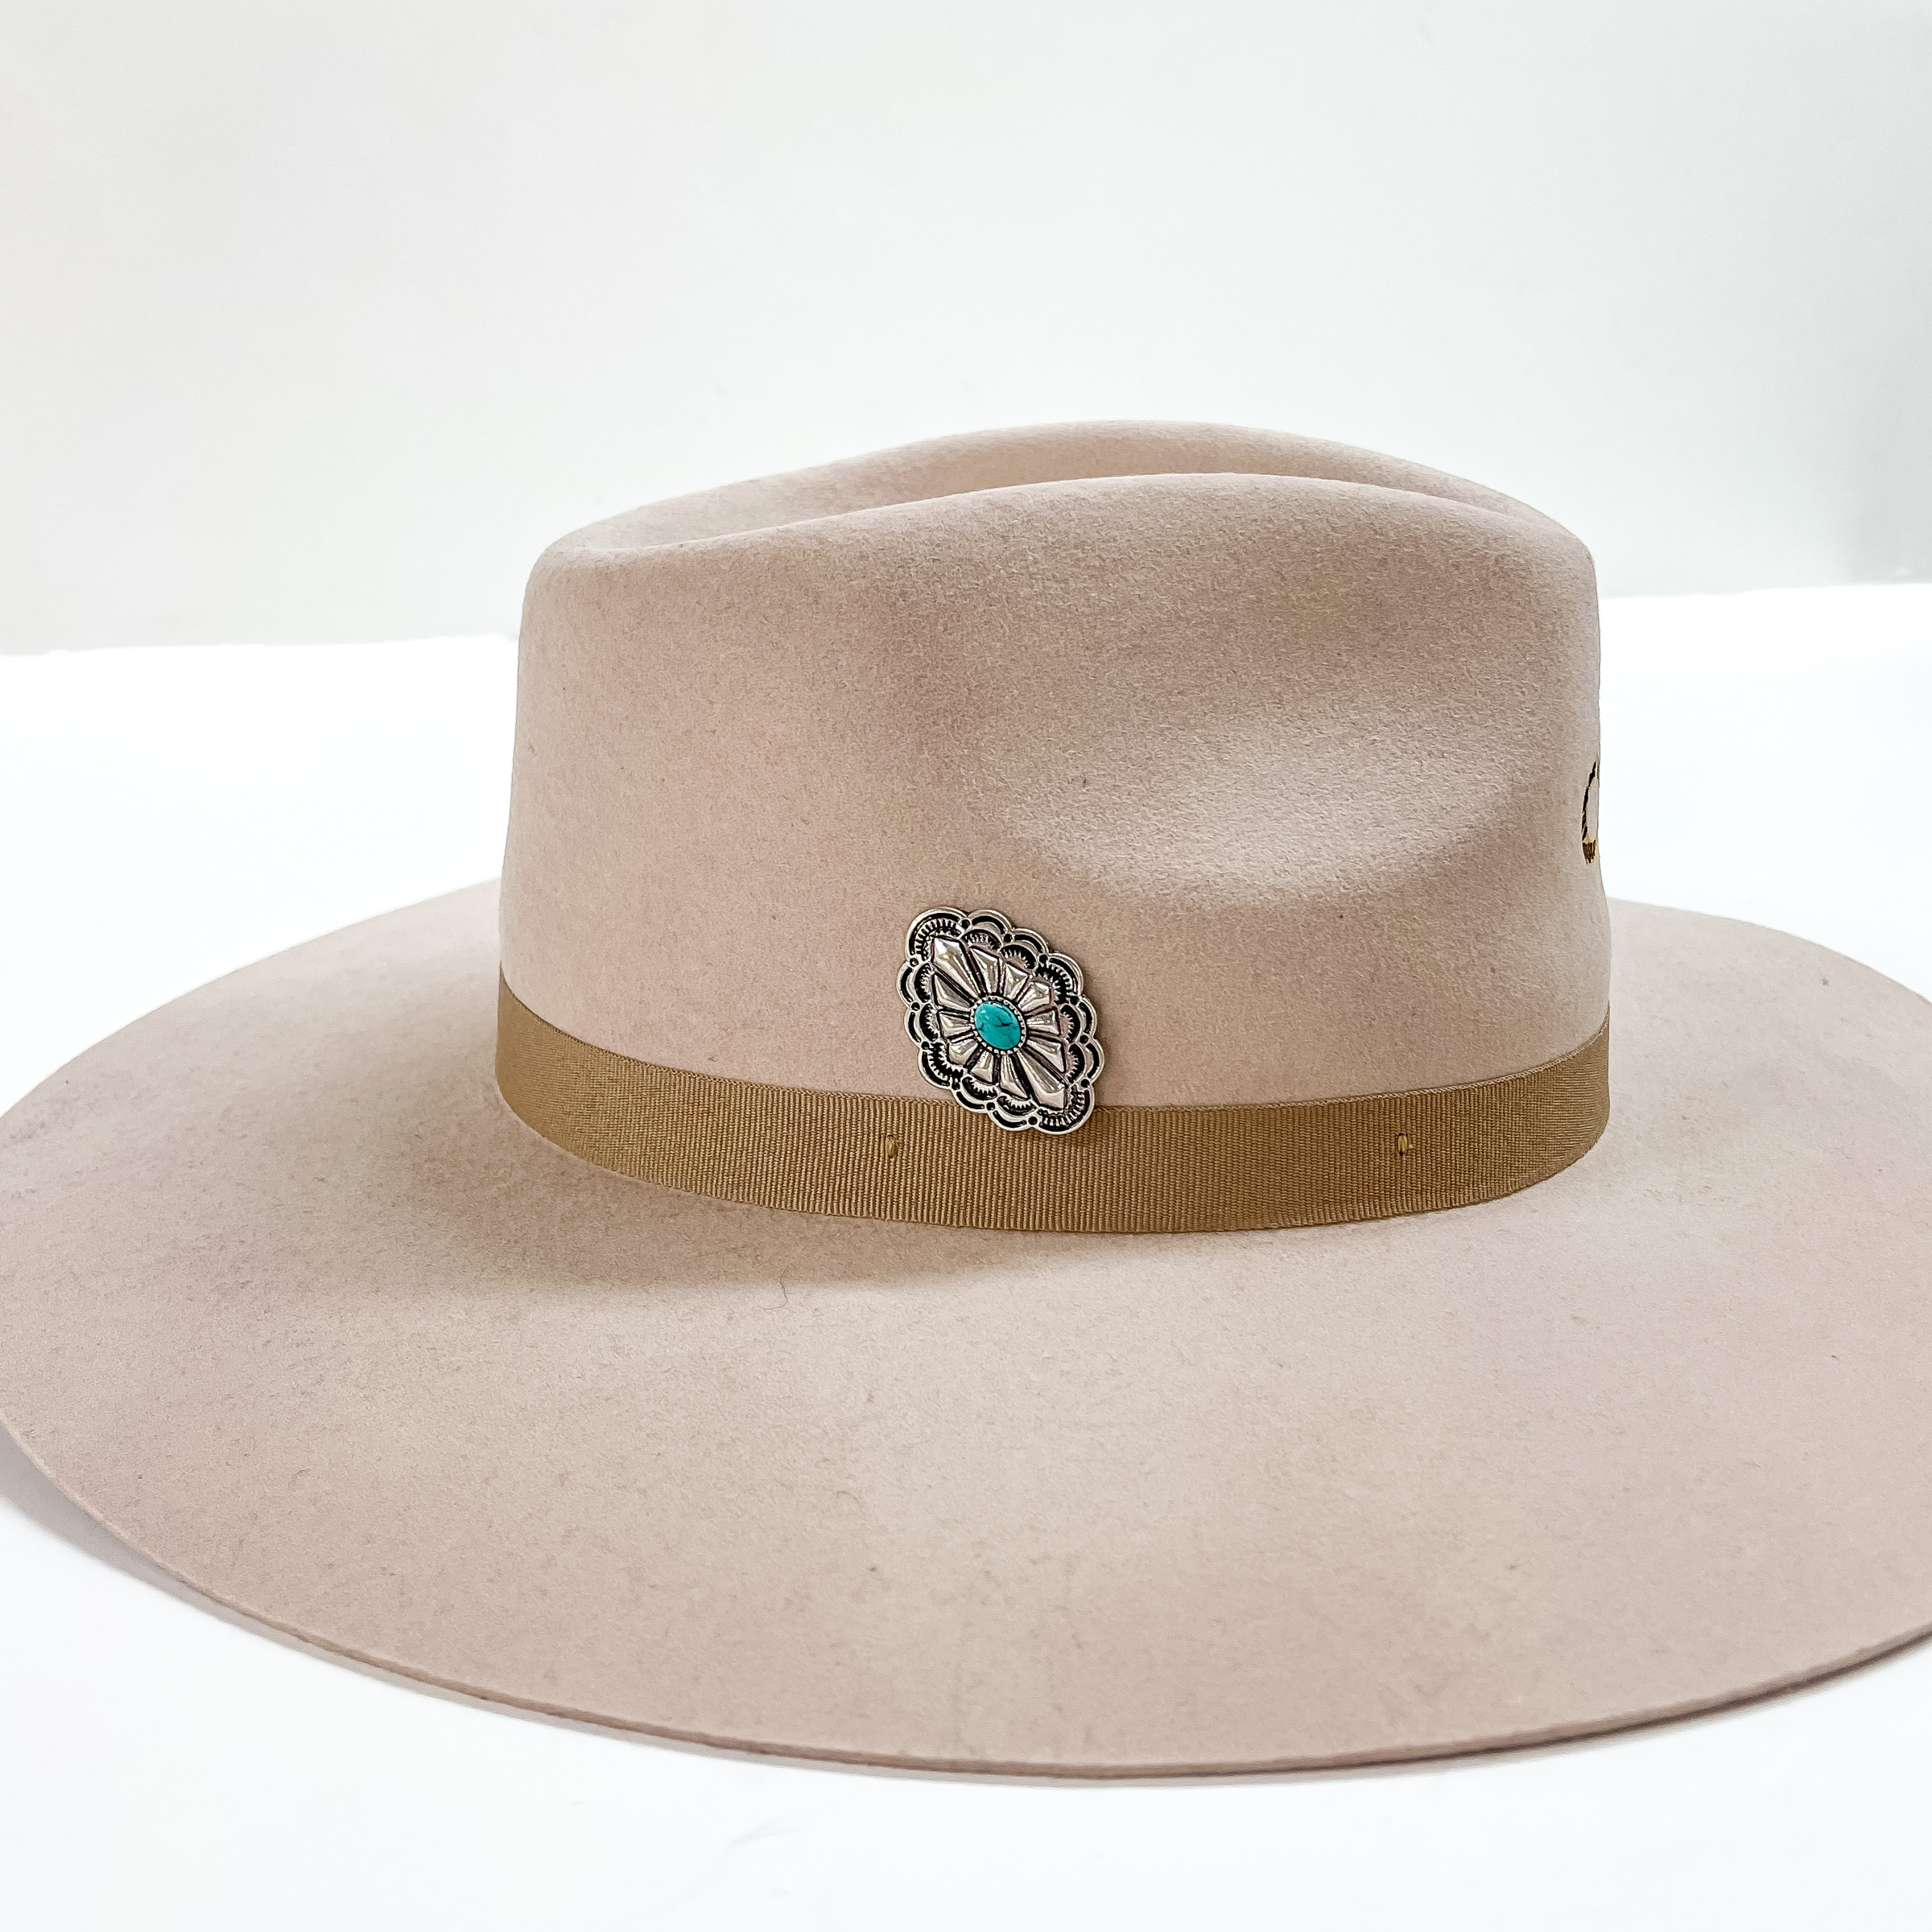 Silver Tone Diamond Concho Hat Pin with Center Turquoise - Giddy Up Glamour Boutique